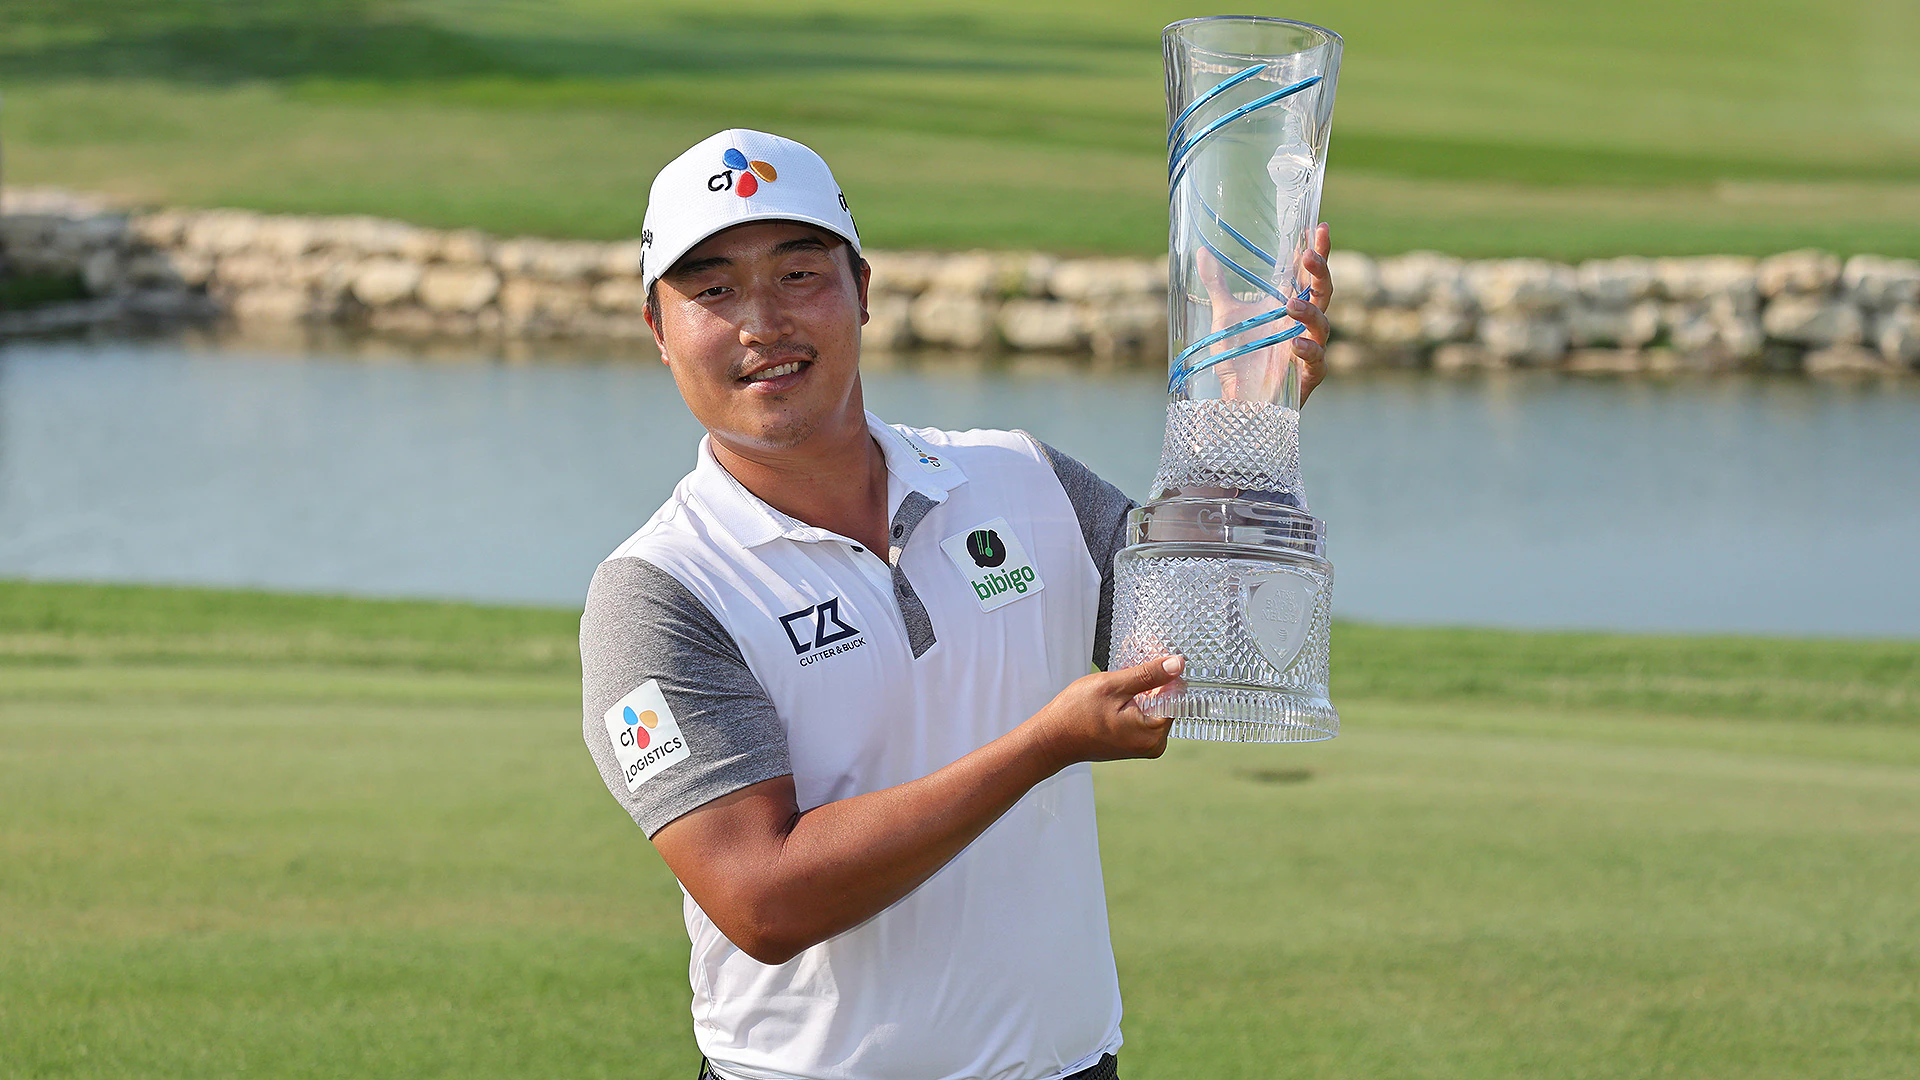 K.H. Lee defends AT&T Byron Nelson title in shootout over Jordan Spieth and Co.